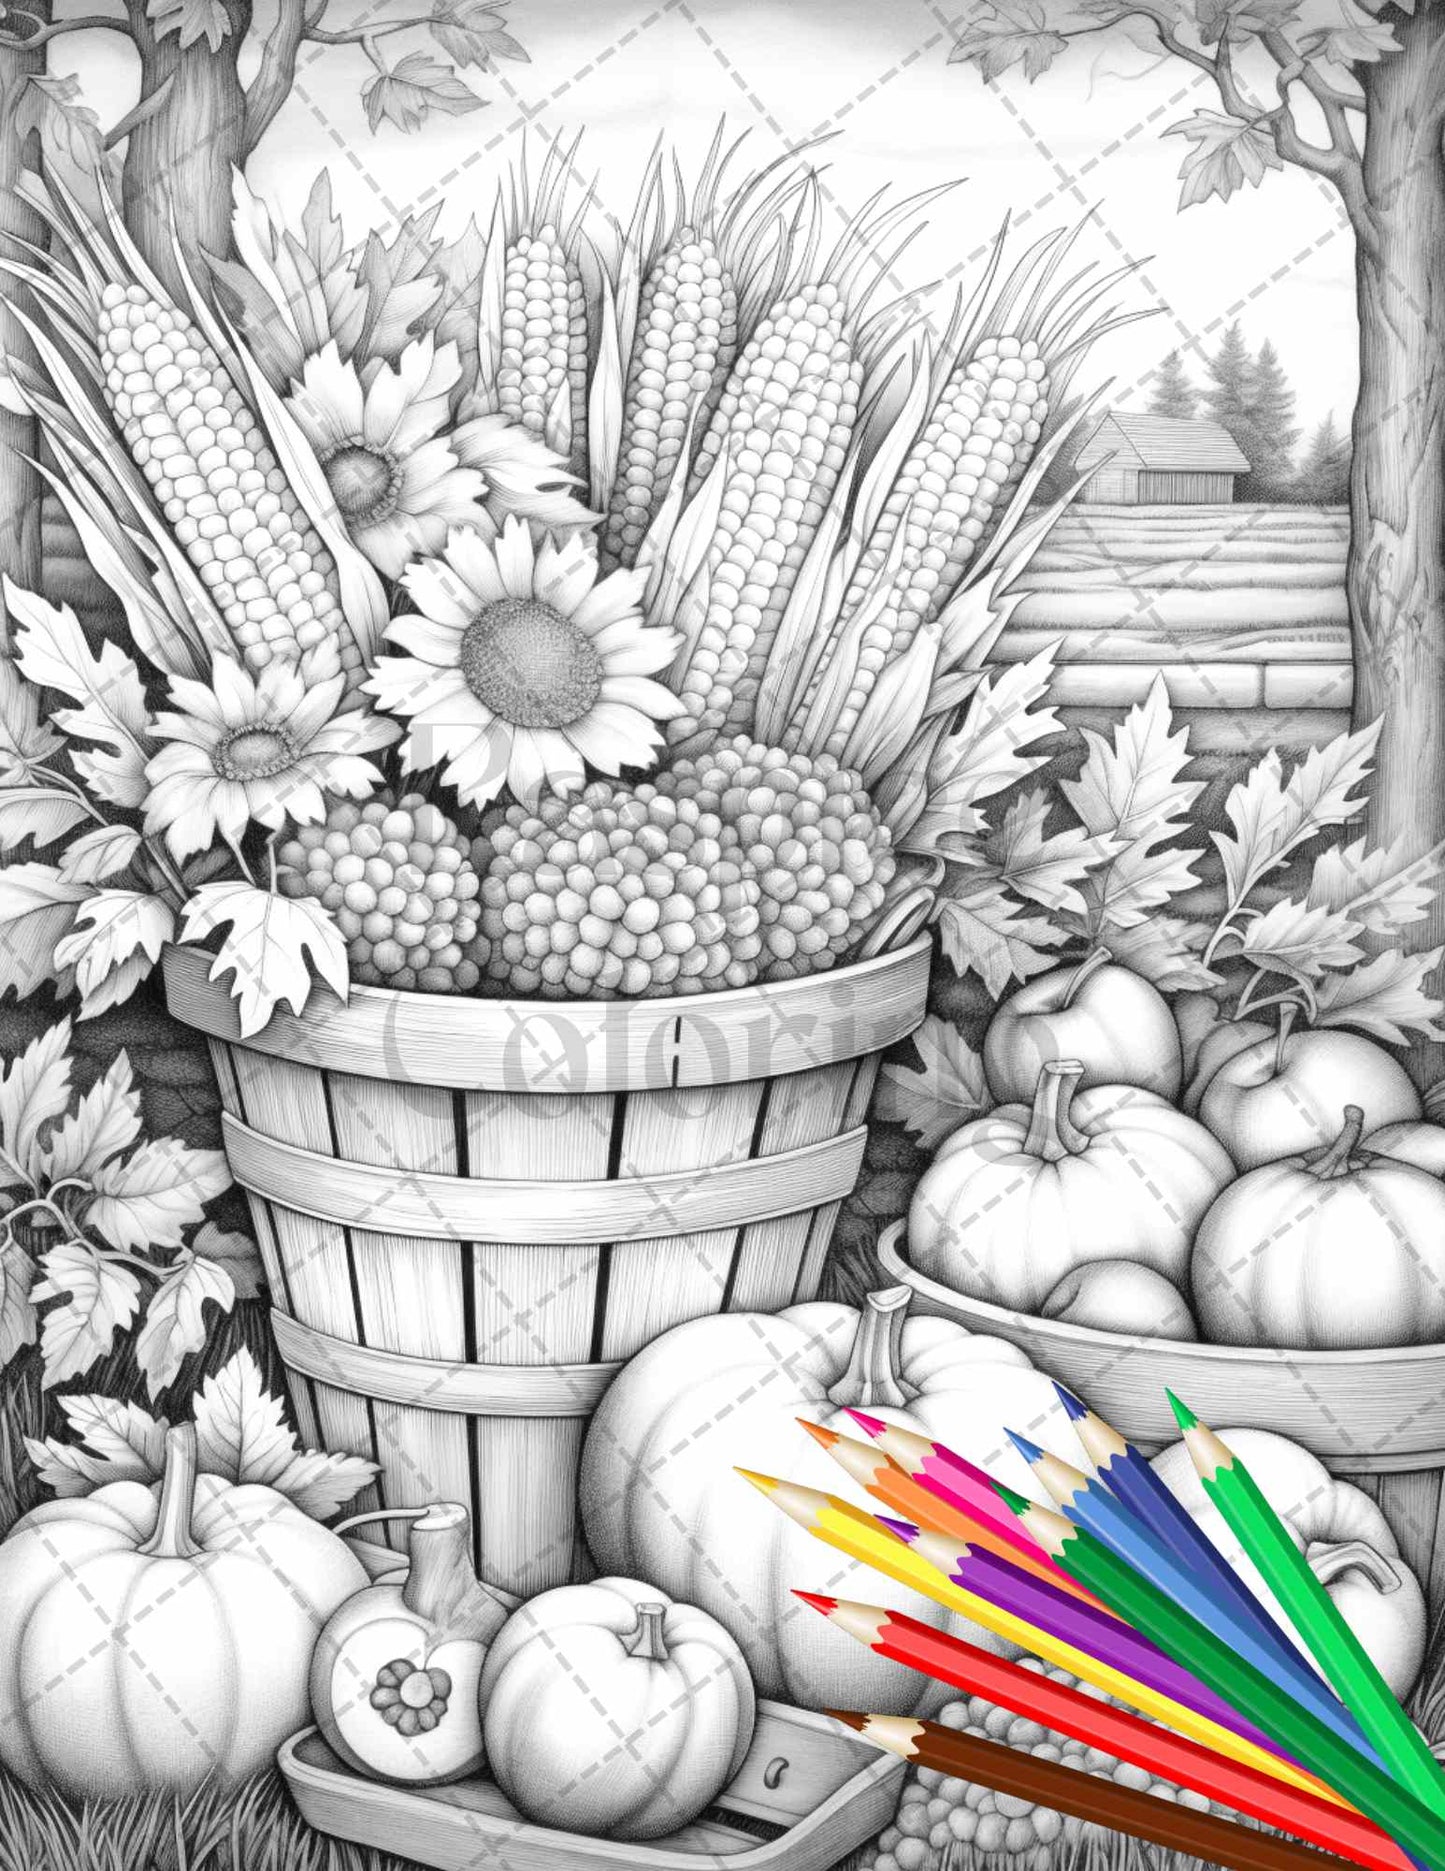 Autumn Harvest Grayscale Coloring Pages Printable for Adults, Relaxing Fall Themed Art, PDF File Instant Download - raspiee